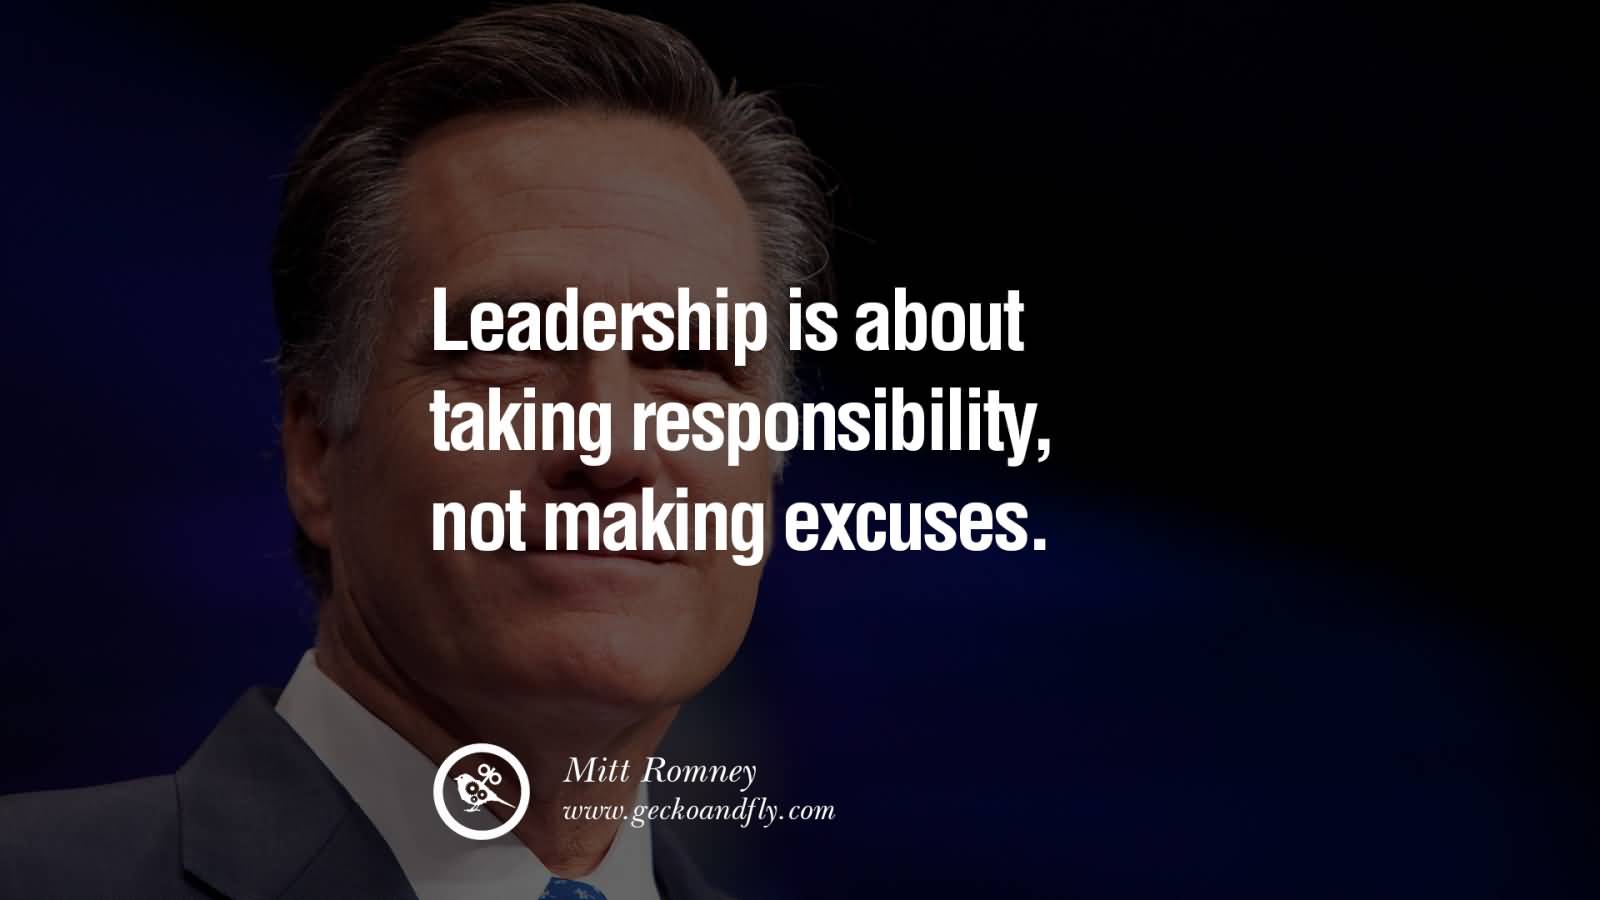 Leadership is about taking responsibility, not making excuses. Mitt Romney